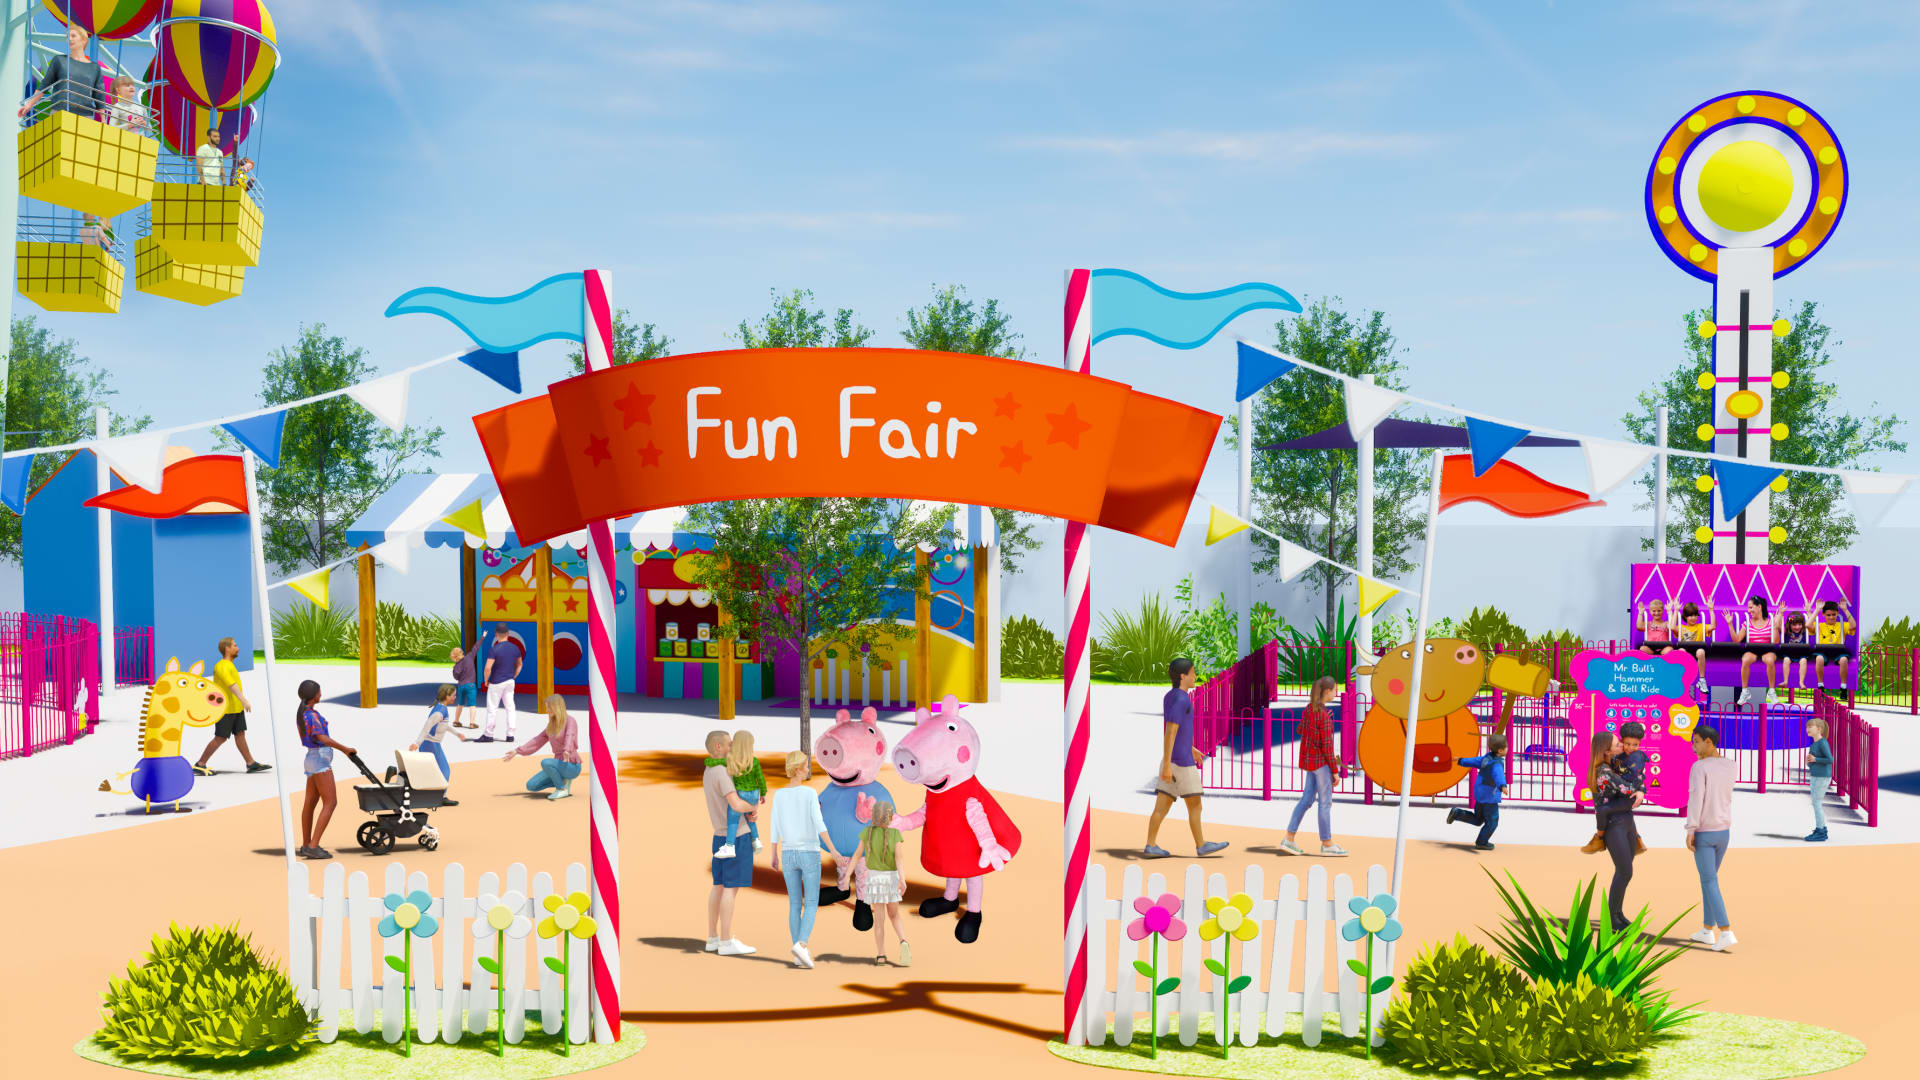 The Peppa Pig theme park is all-new standalone theme park that will feature multiple rides, interactive attractions, themed playscapes and water play areas.